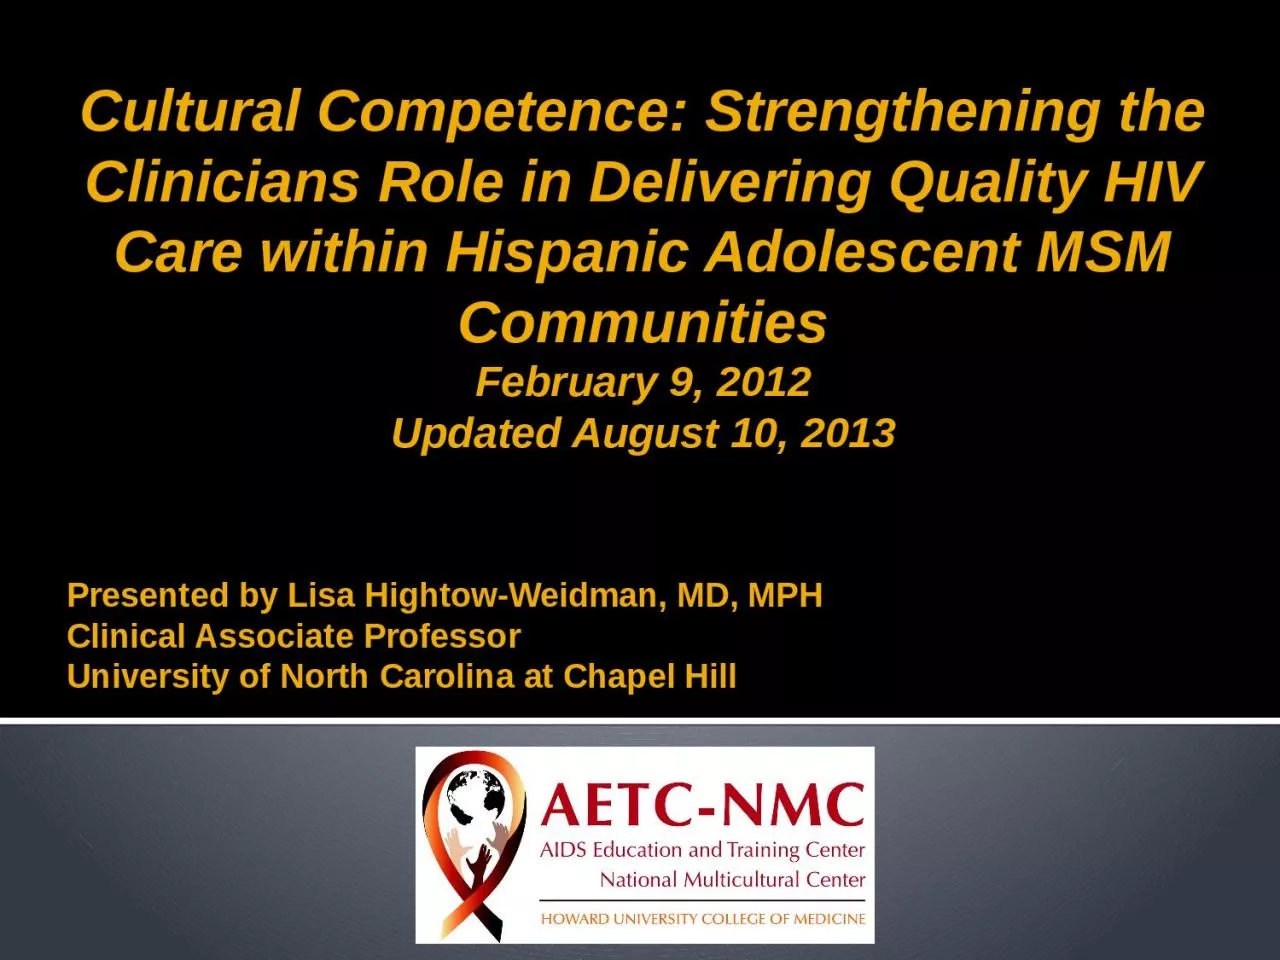 Cultural Competence: Strengthening the Clinicians Role in Delivering Quality HIV Care